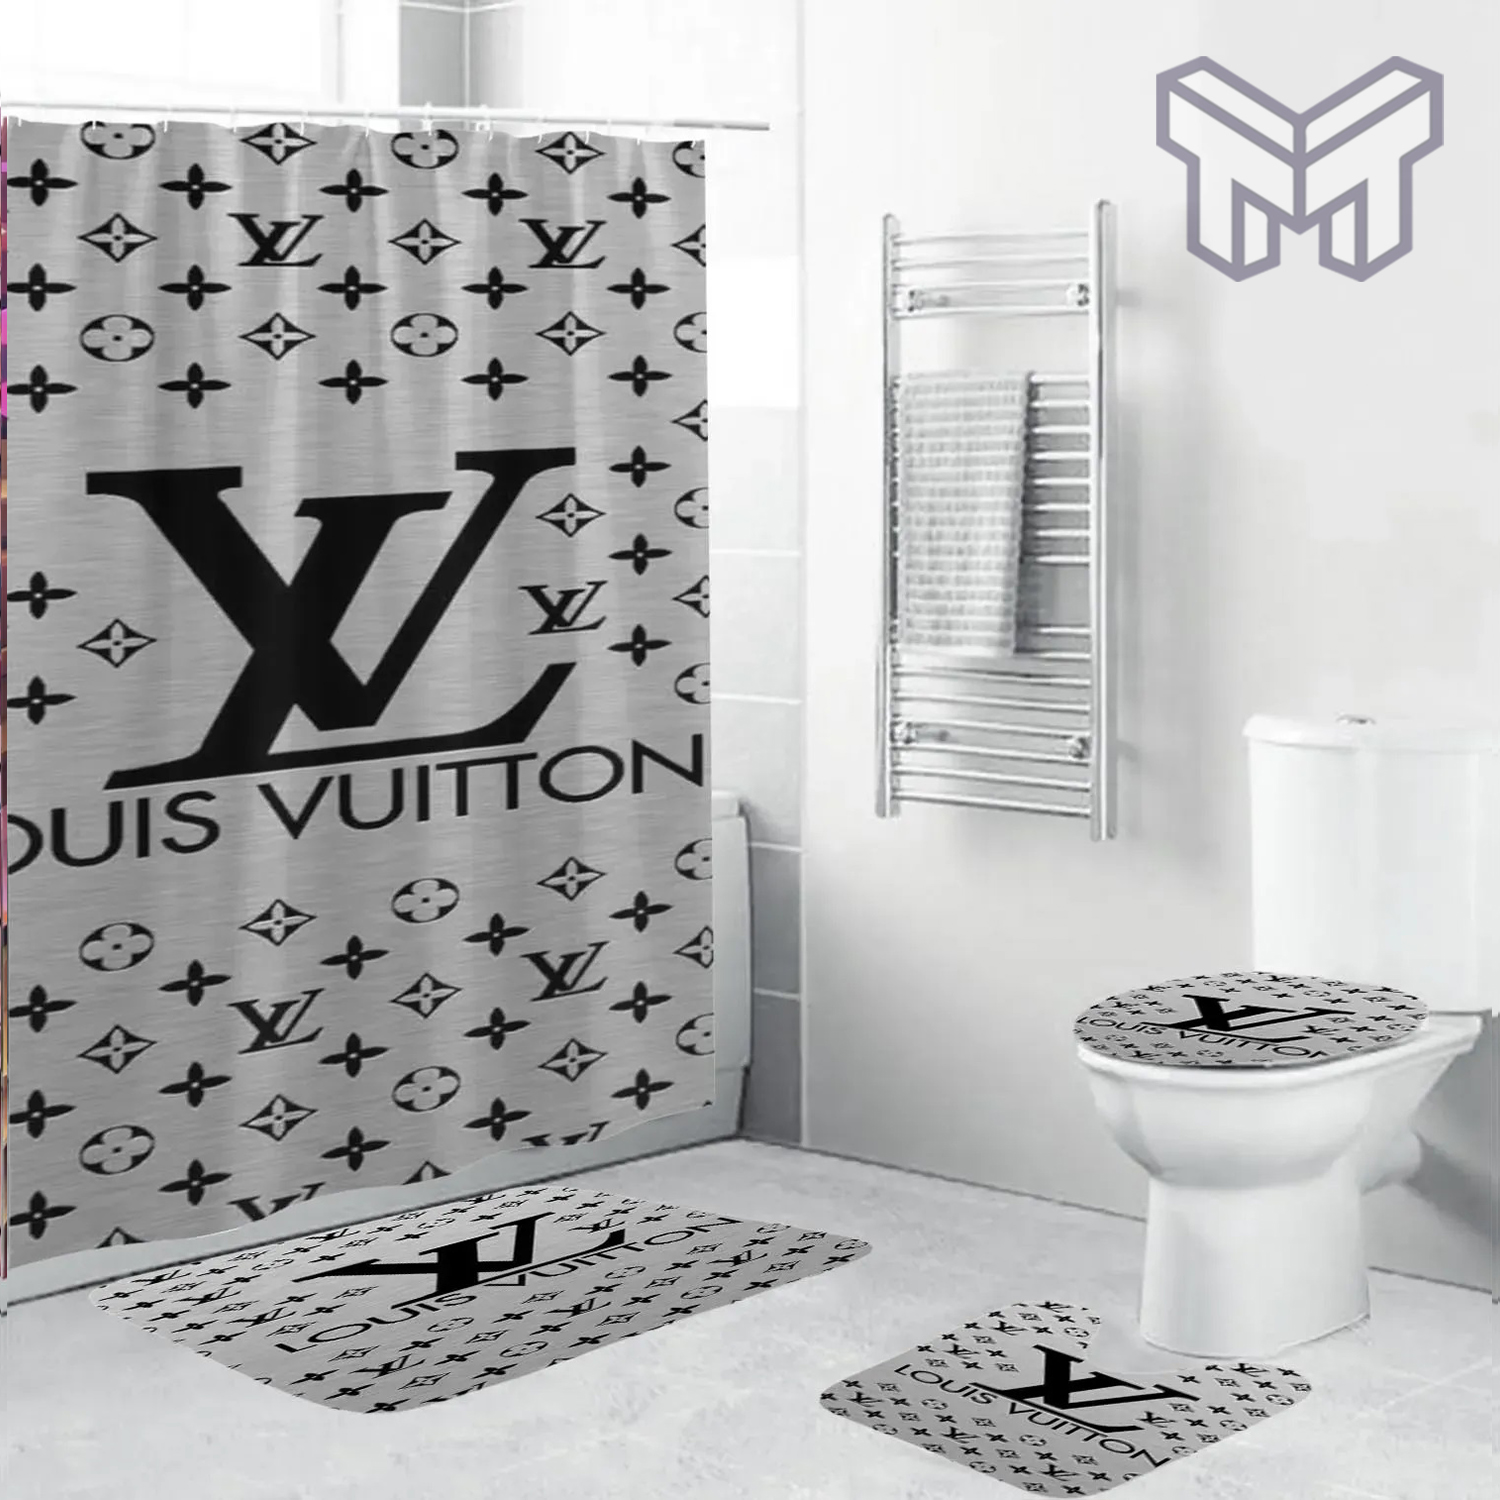 Louis Vuitton Fashion Logo Limited Luxury Brand Bathroom Set Home Decor 48  Shower Curtain And Rug Toilet Seat Lid Covers Bathroom Set - Muranotex Store